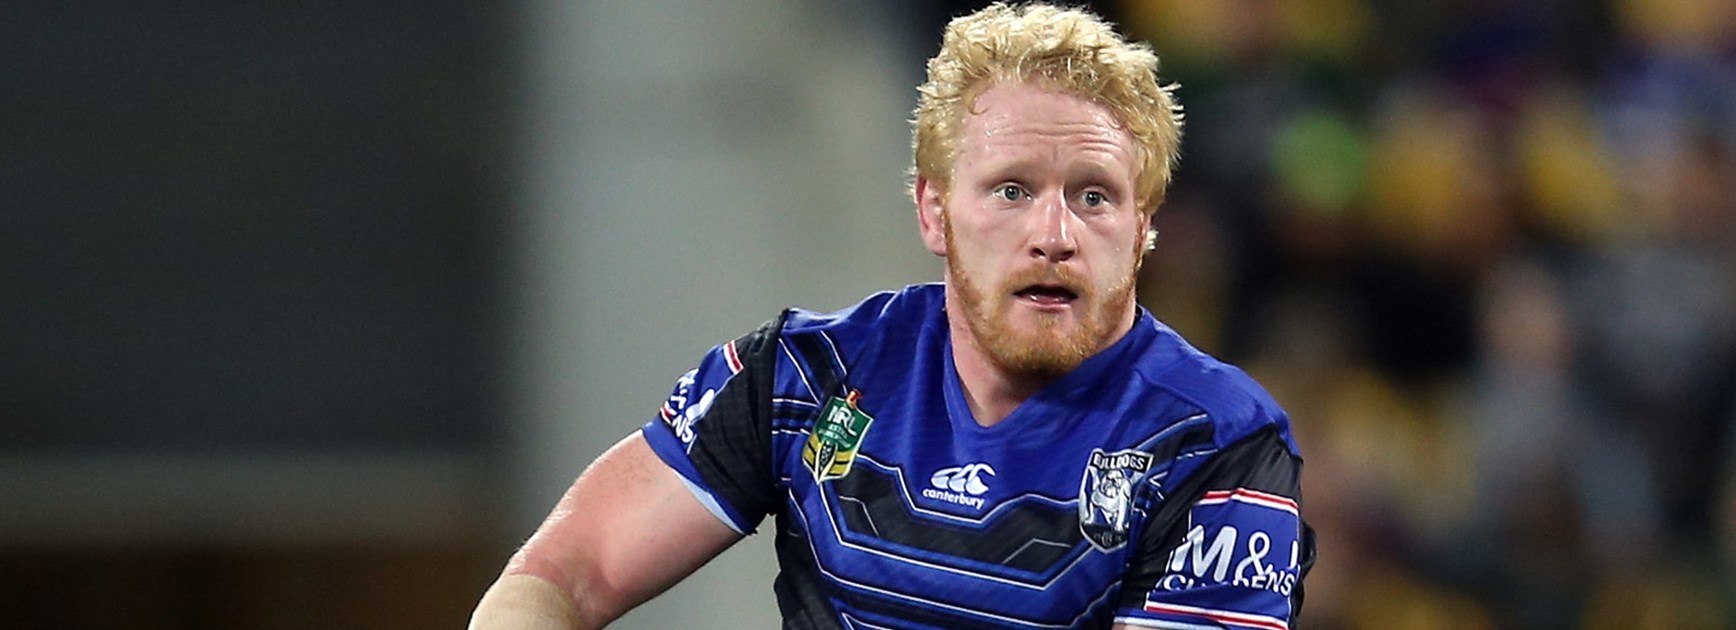 Bulldogs captain James Graham against the Warriors in Round 7.